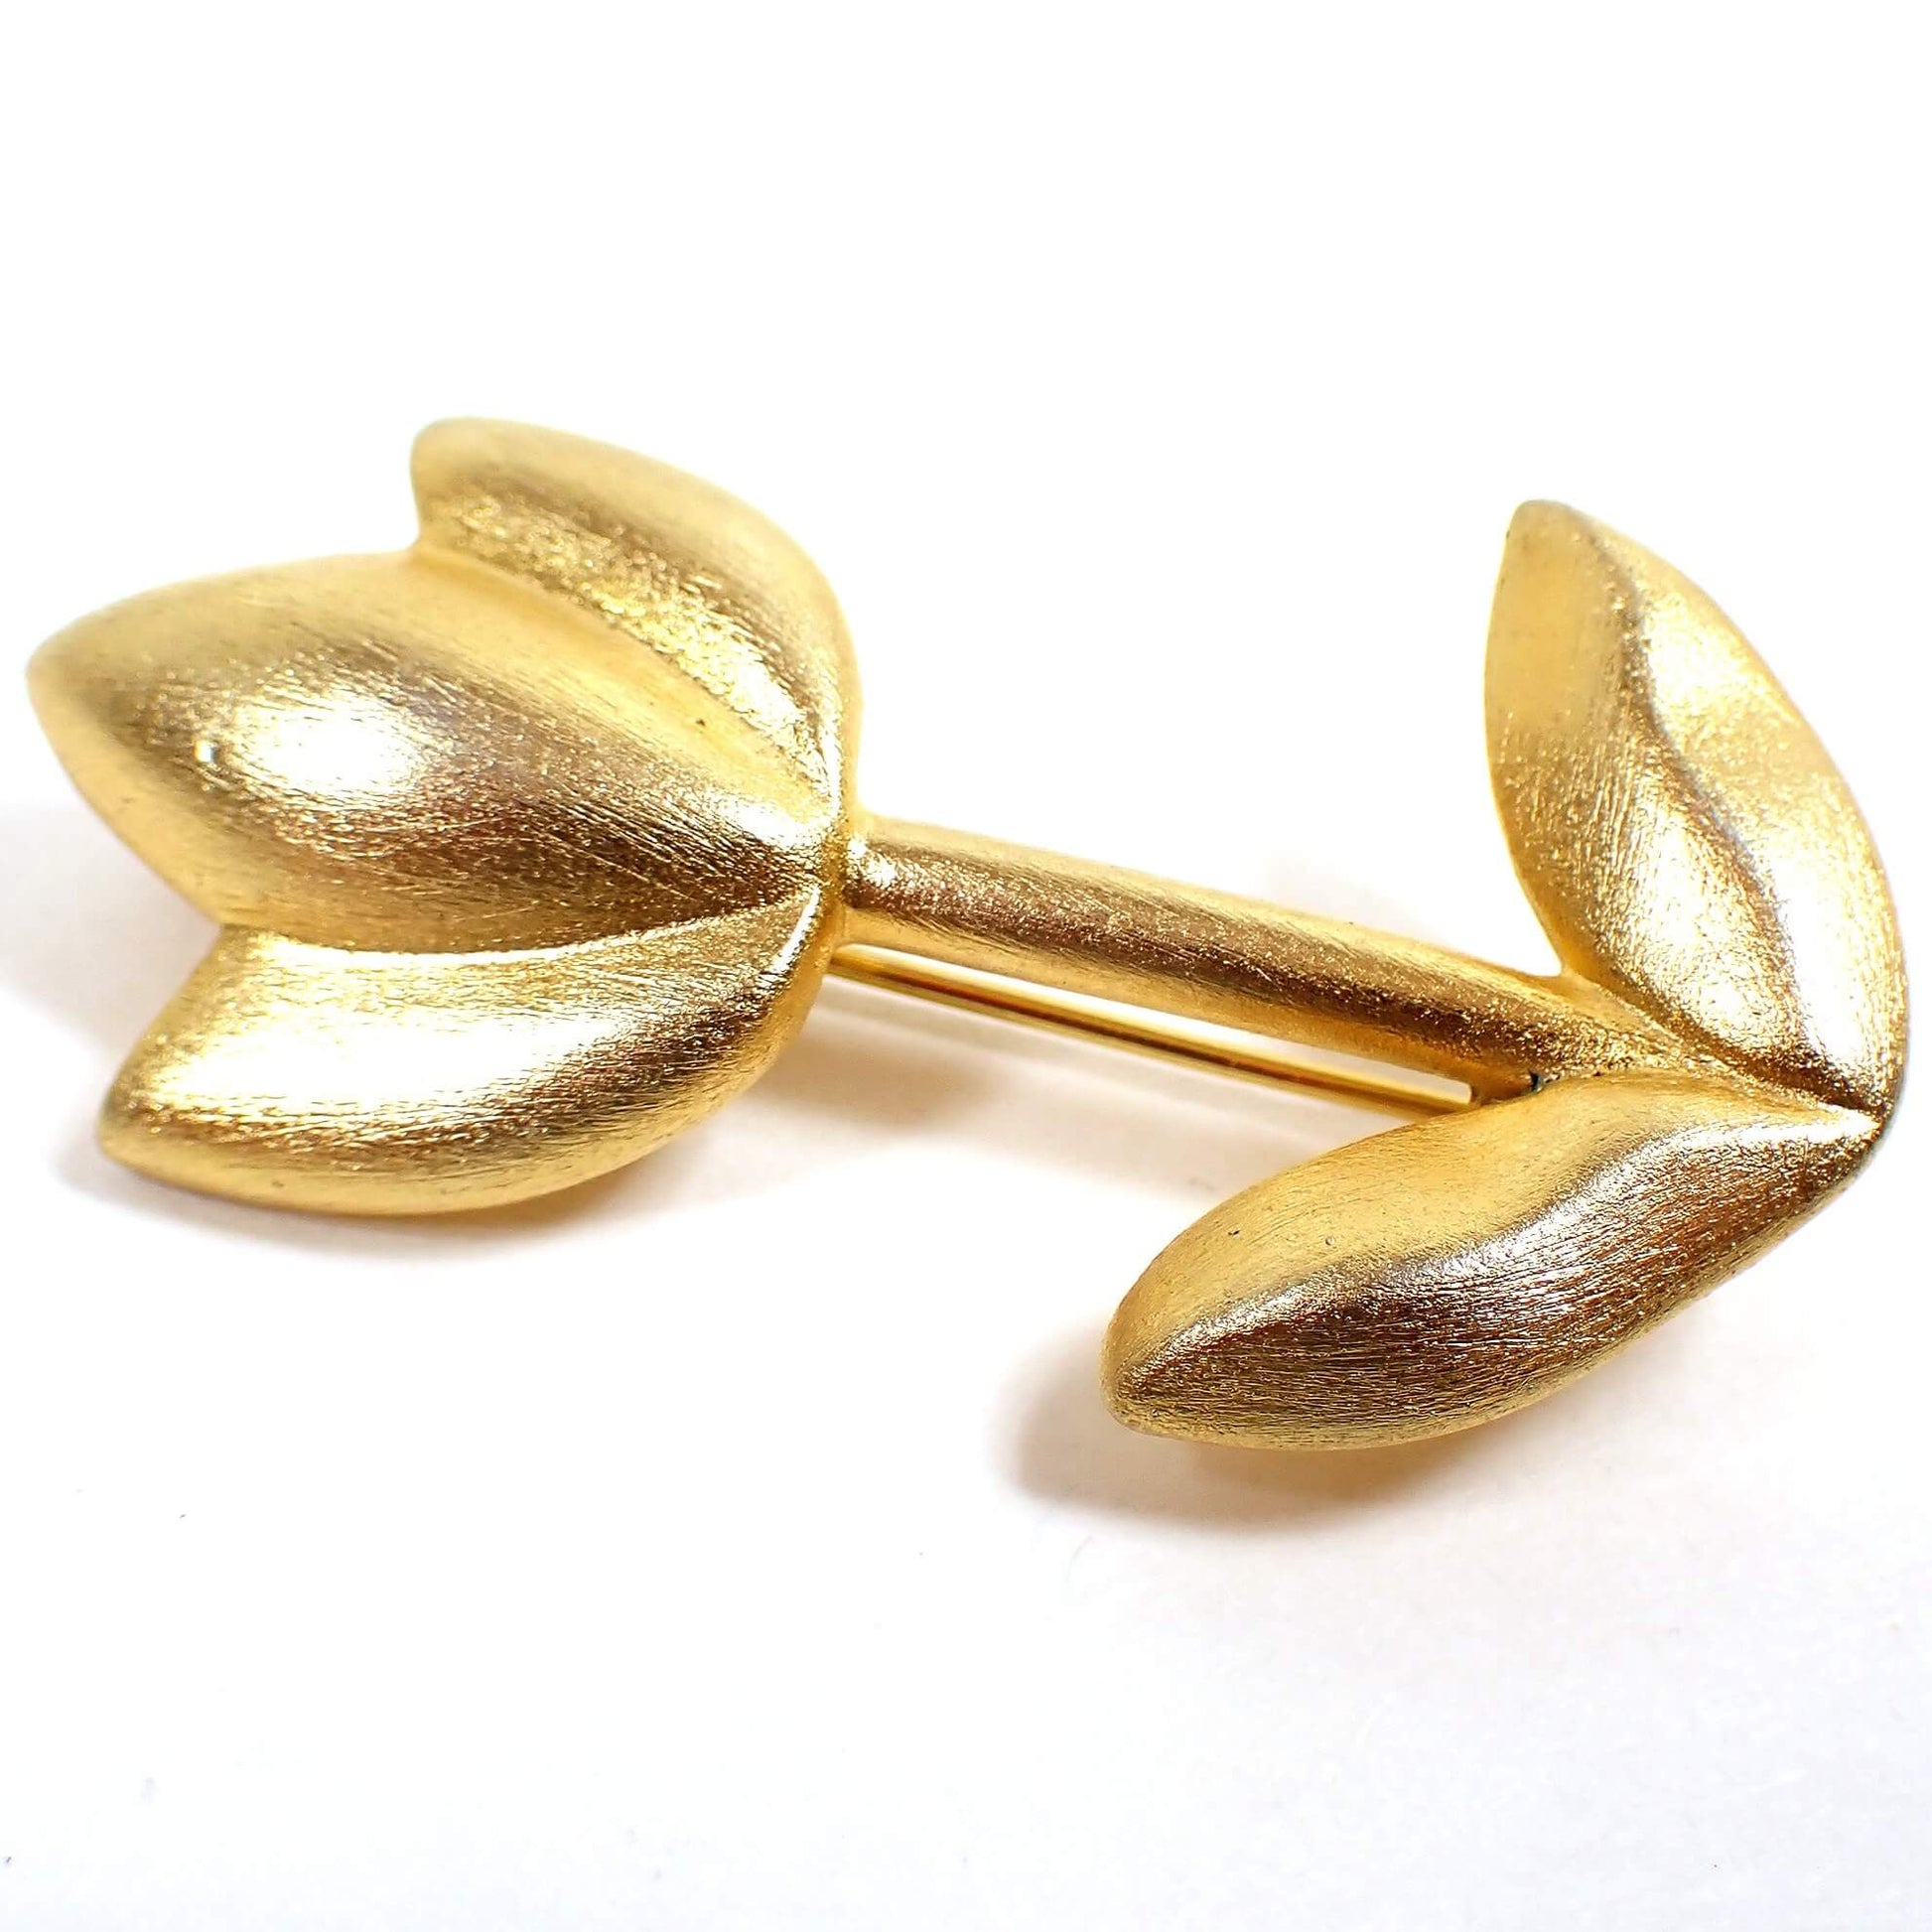 Angled front view of the retro vintage floral brooch pin. The metal is matte brushed gold tone plated in color. It is shaped like a flower with three petals going upward and two leaves at the bottom of the stem.